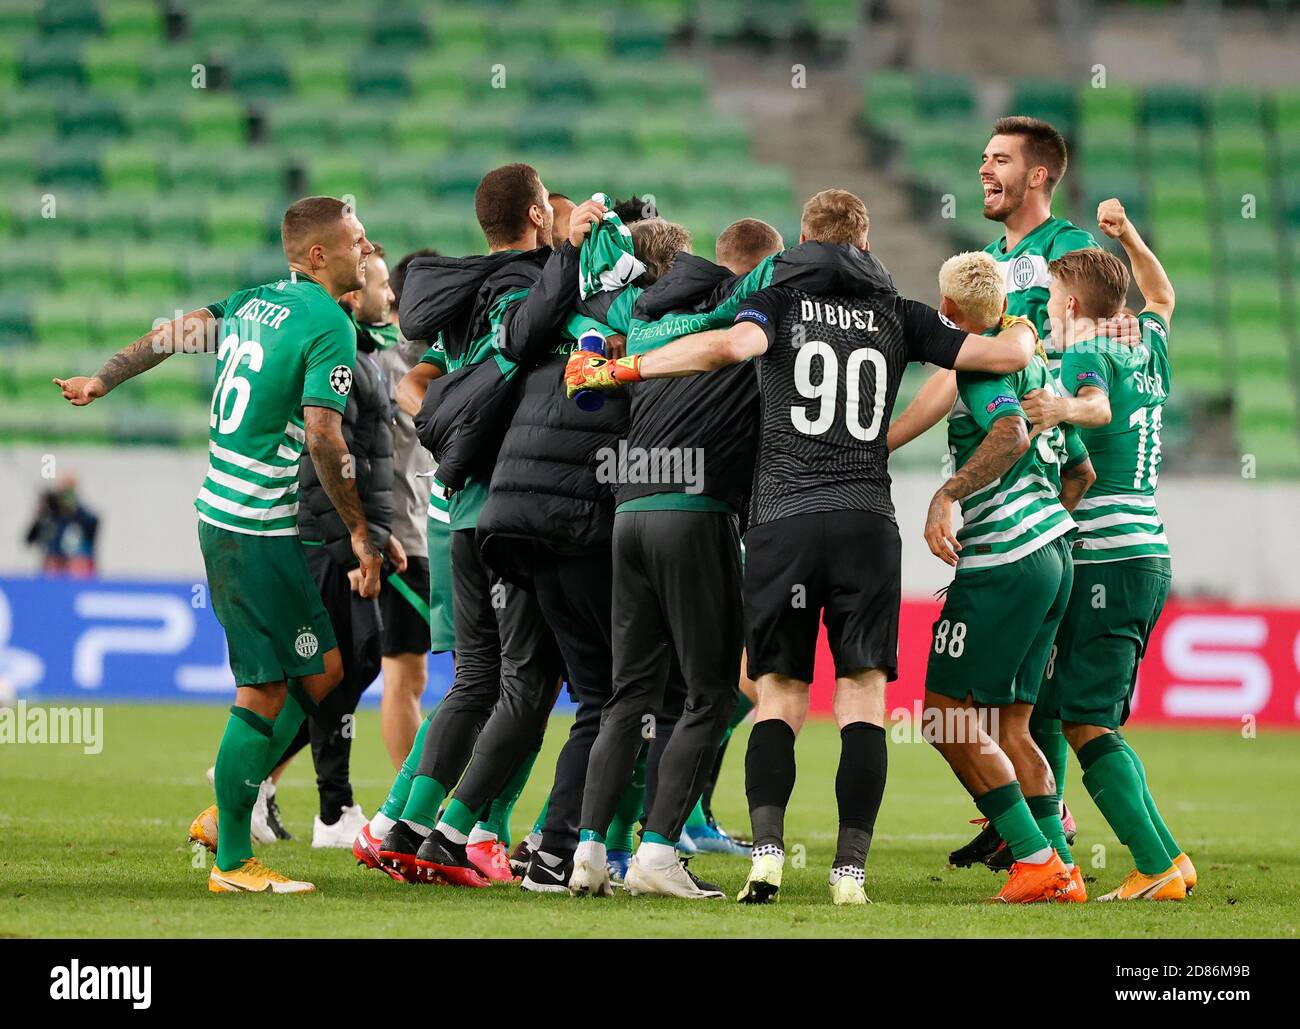 COPA90 on X: Hungarian club Ferencvárosi TC made history last night by  qualifying for the Champions League. The first time in 25 long years.   / X